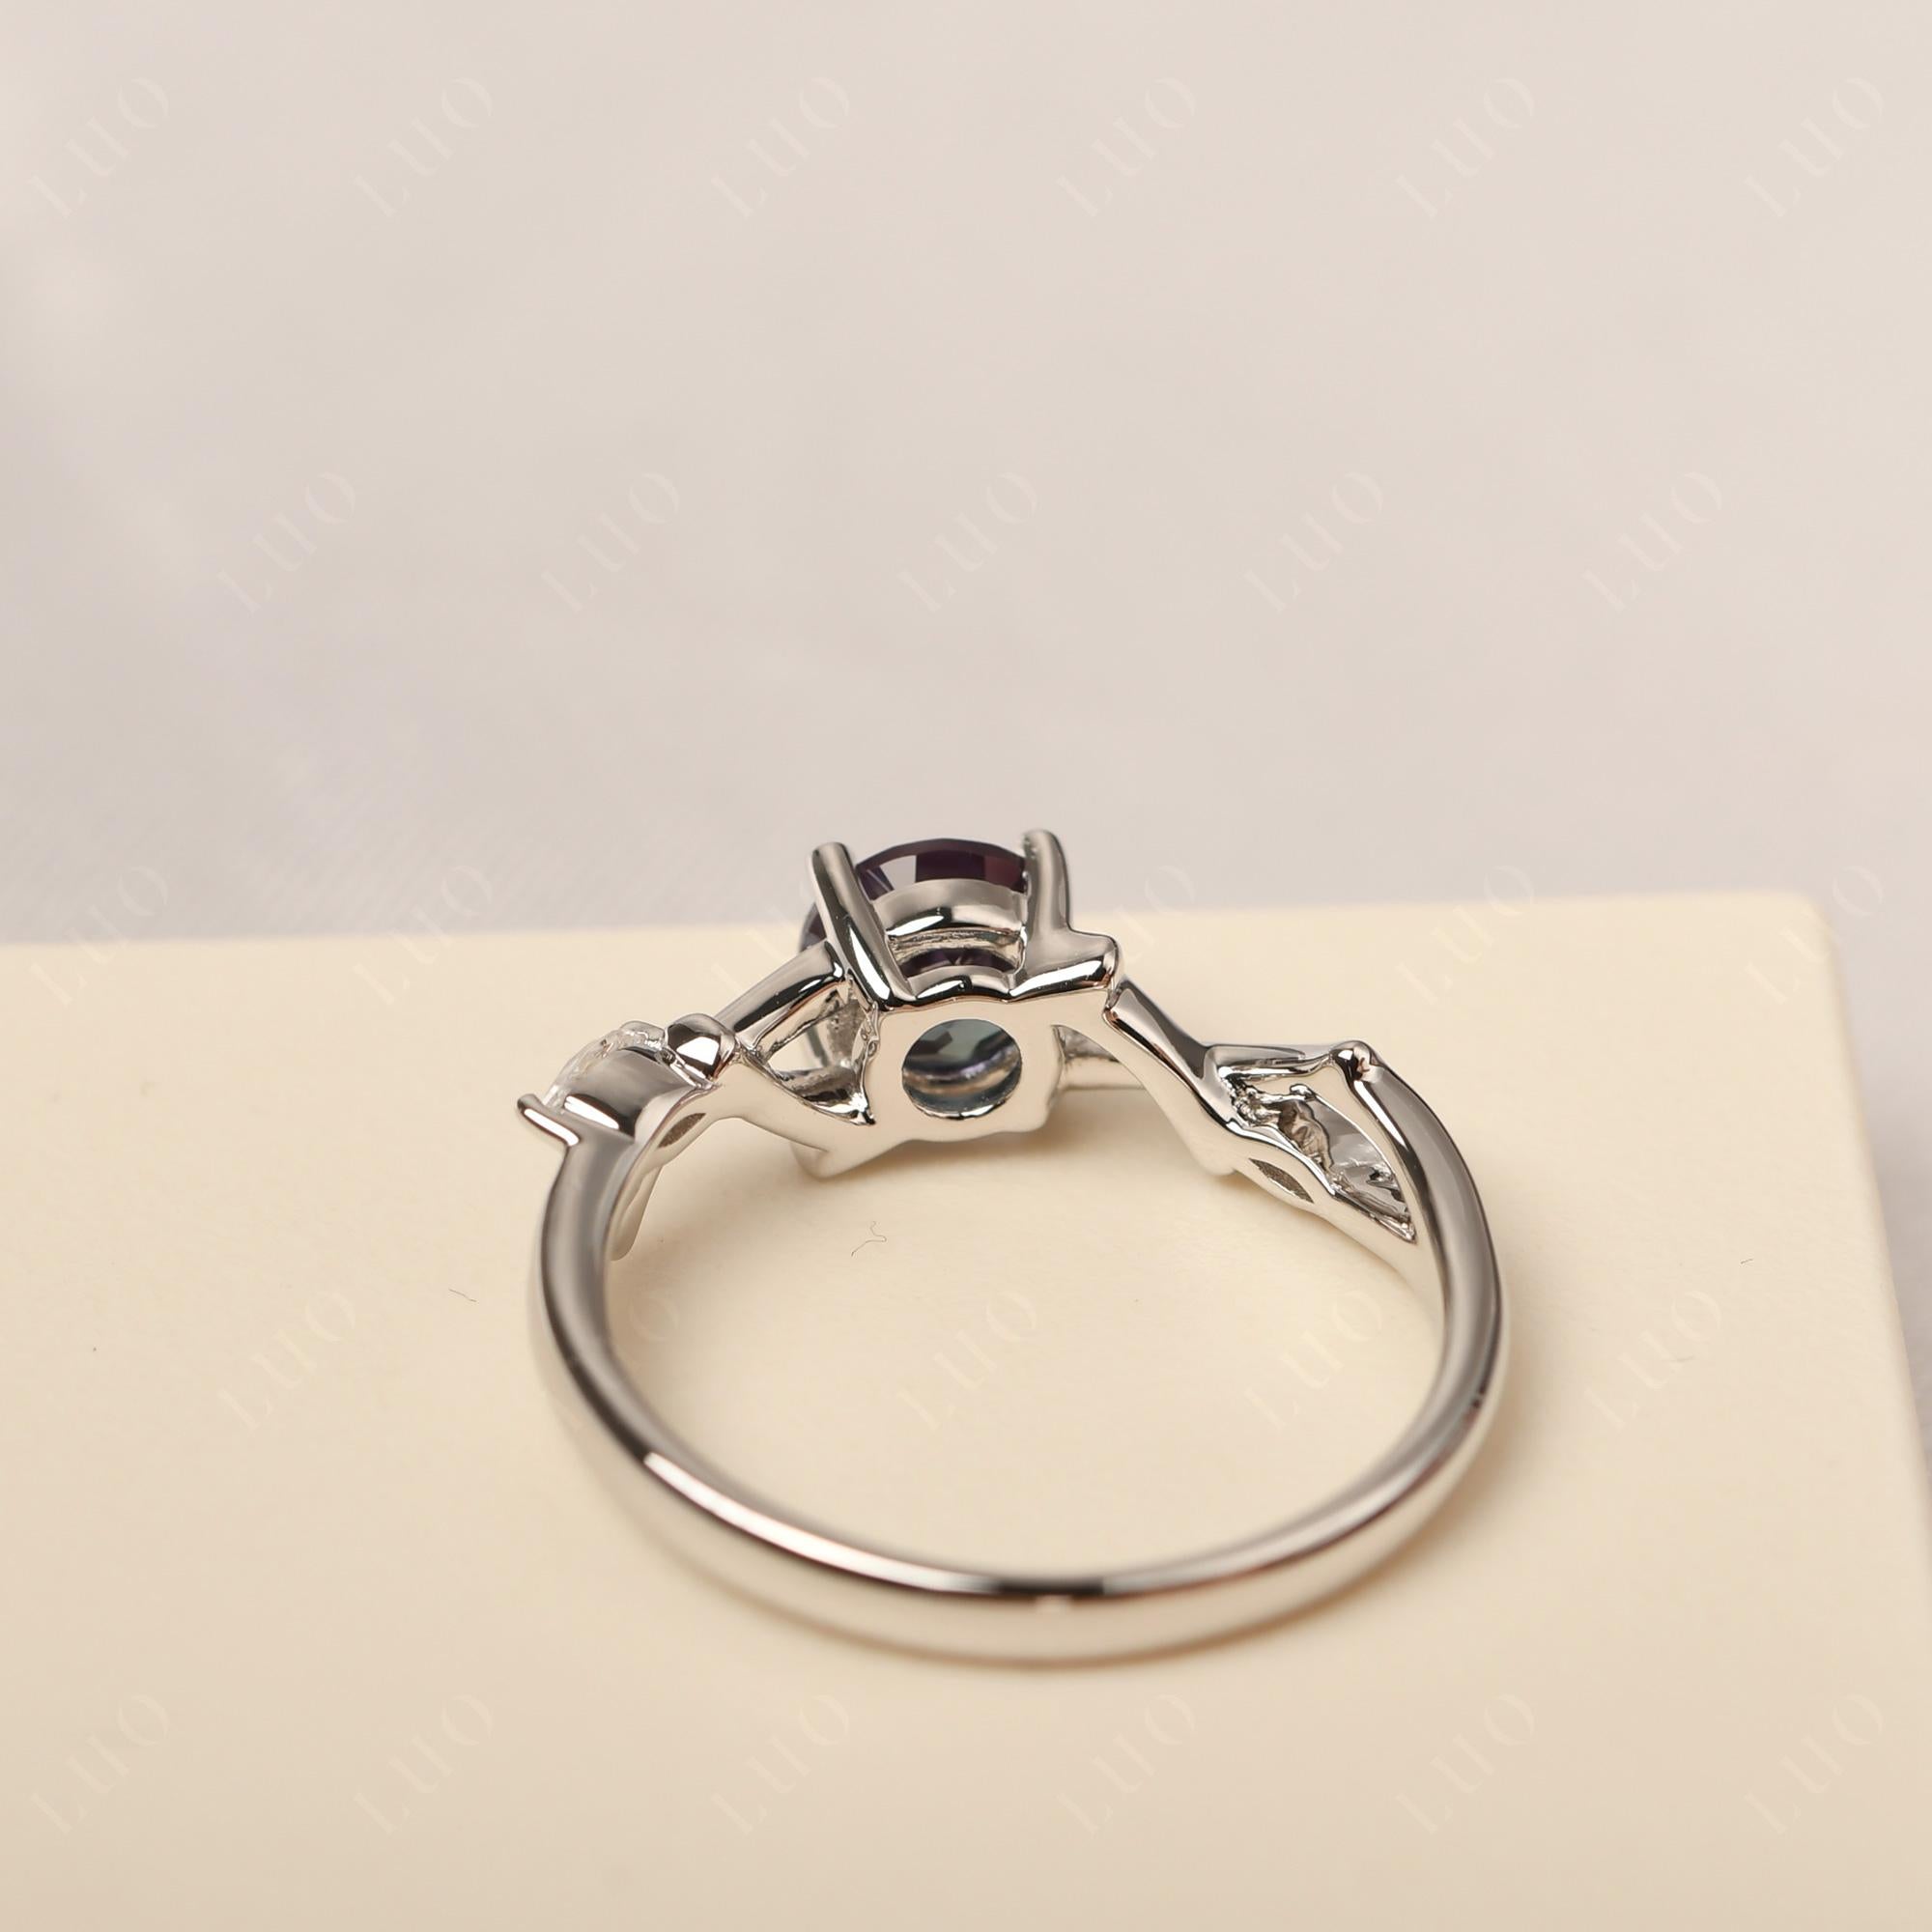 Twig Alexandrite Engagement Ring - LUO Jewelry